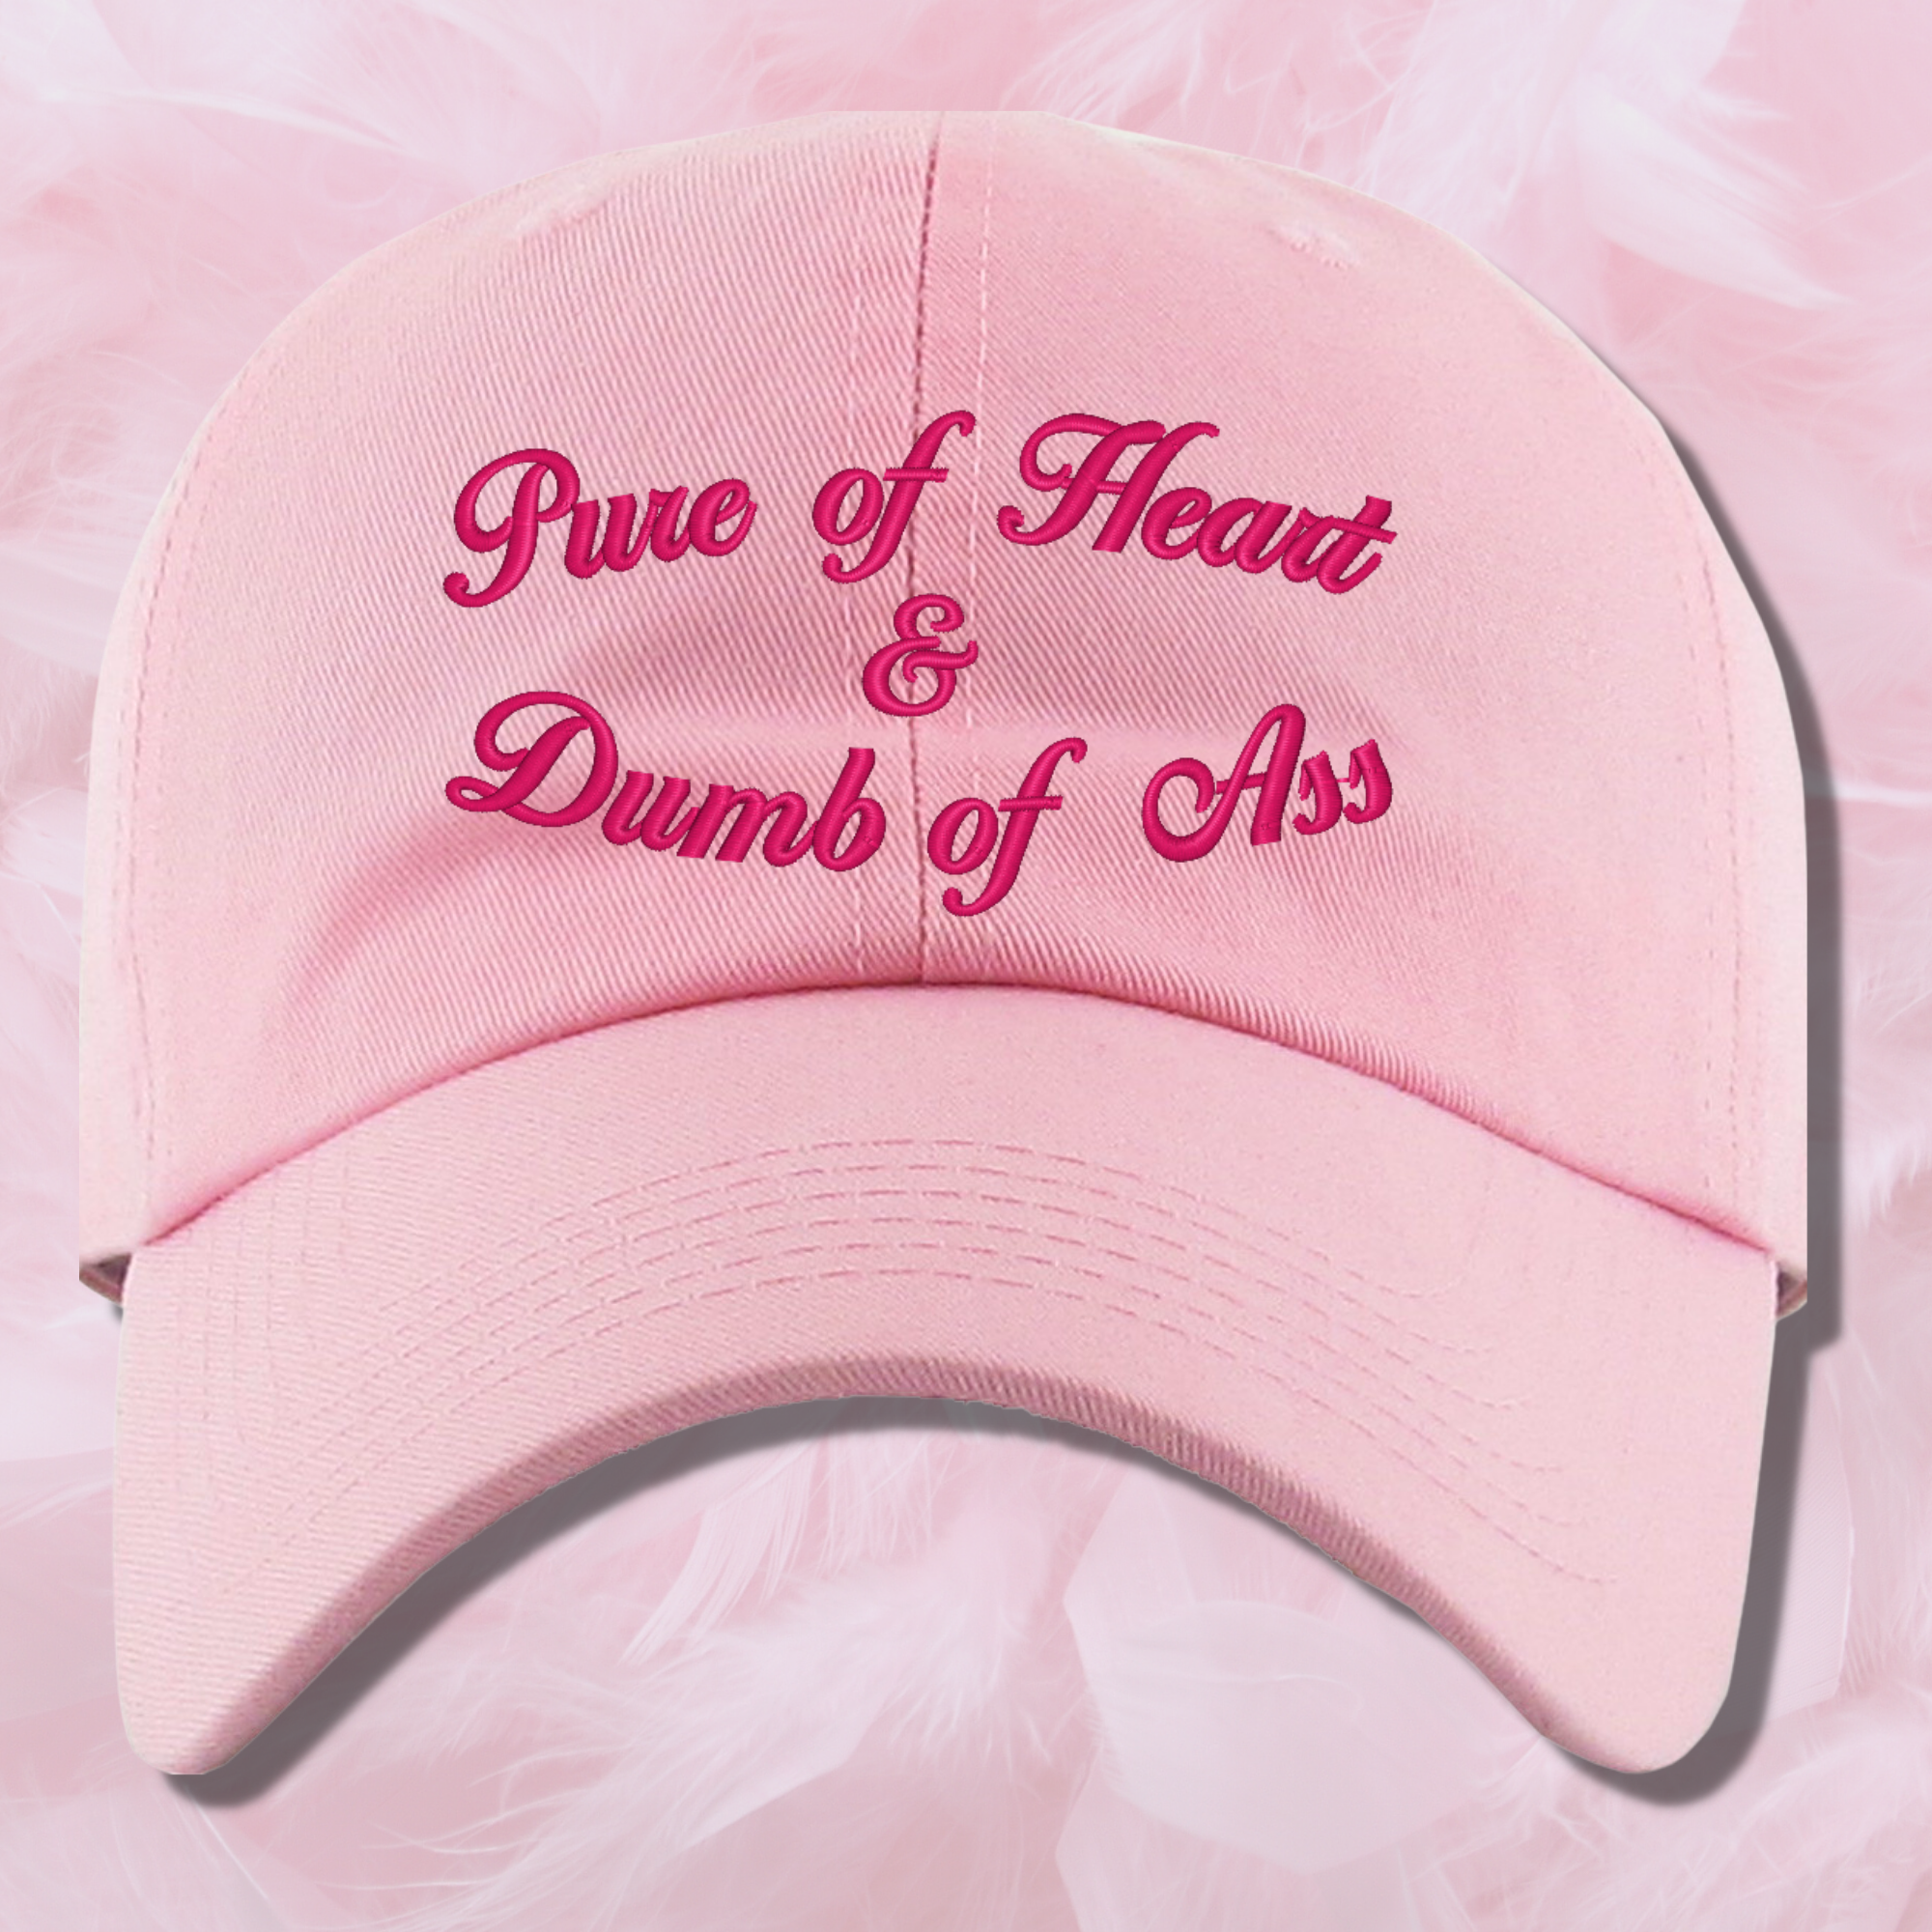 Pure of Heart & Dumb of Ass Pink Embroidered Dad Hat, One Size Fits All